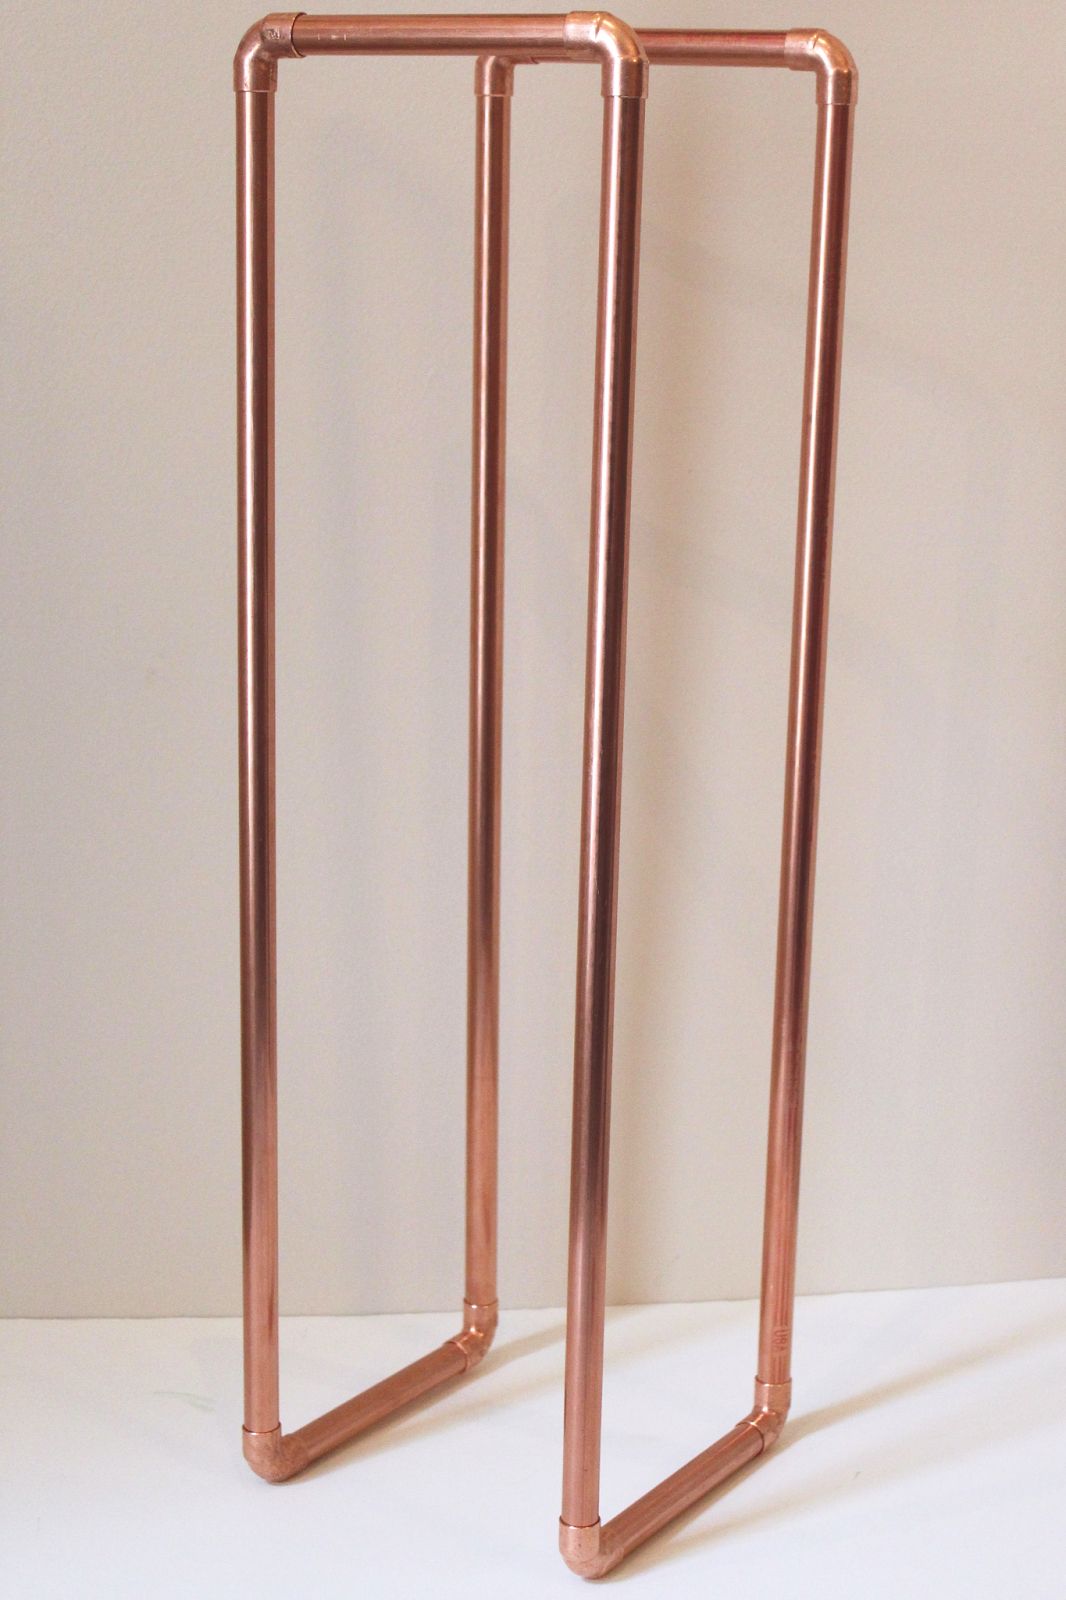 Copper Leg Plant Stand | Sarah & Nick Intended For Copper Plant Stands (View 15 of 15)